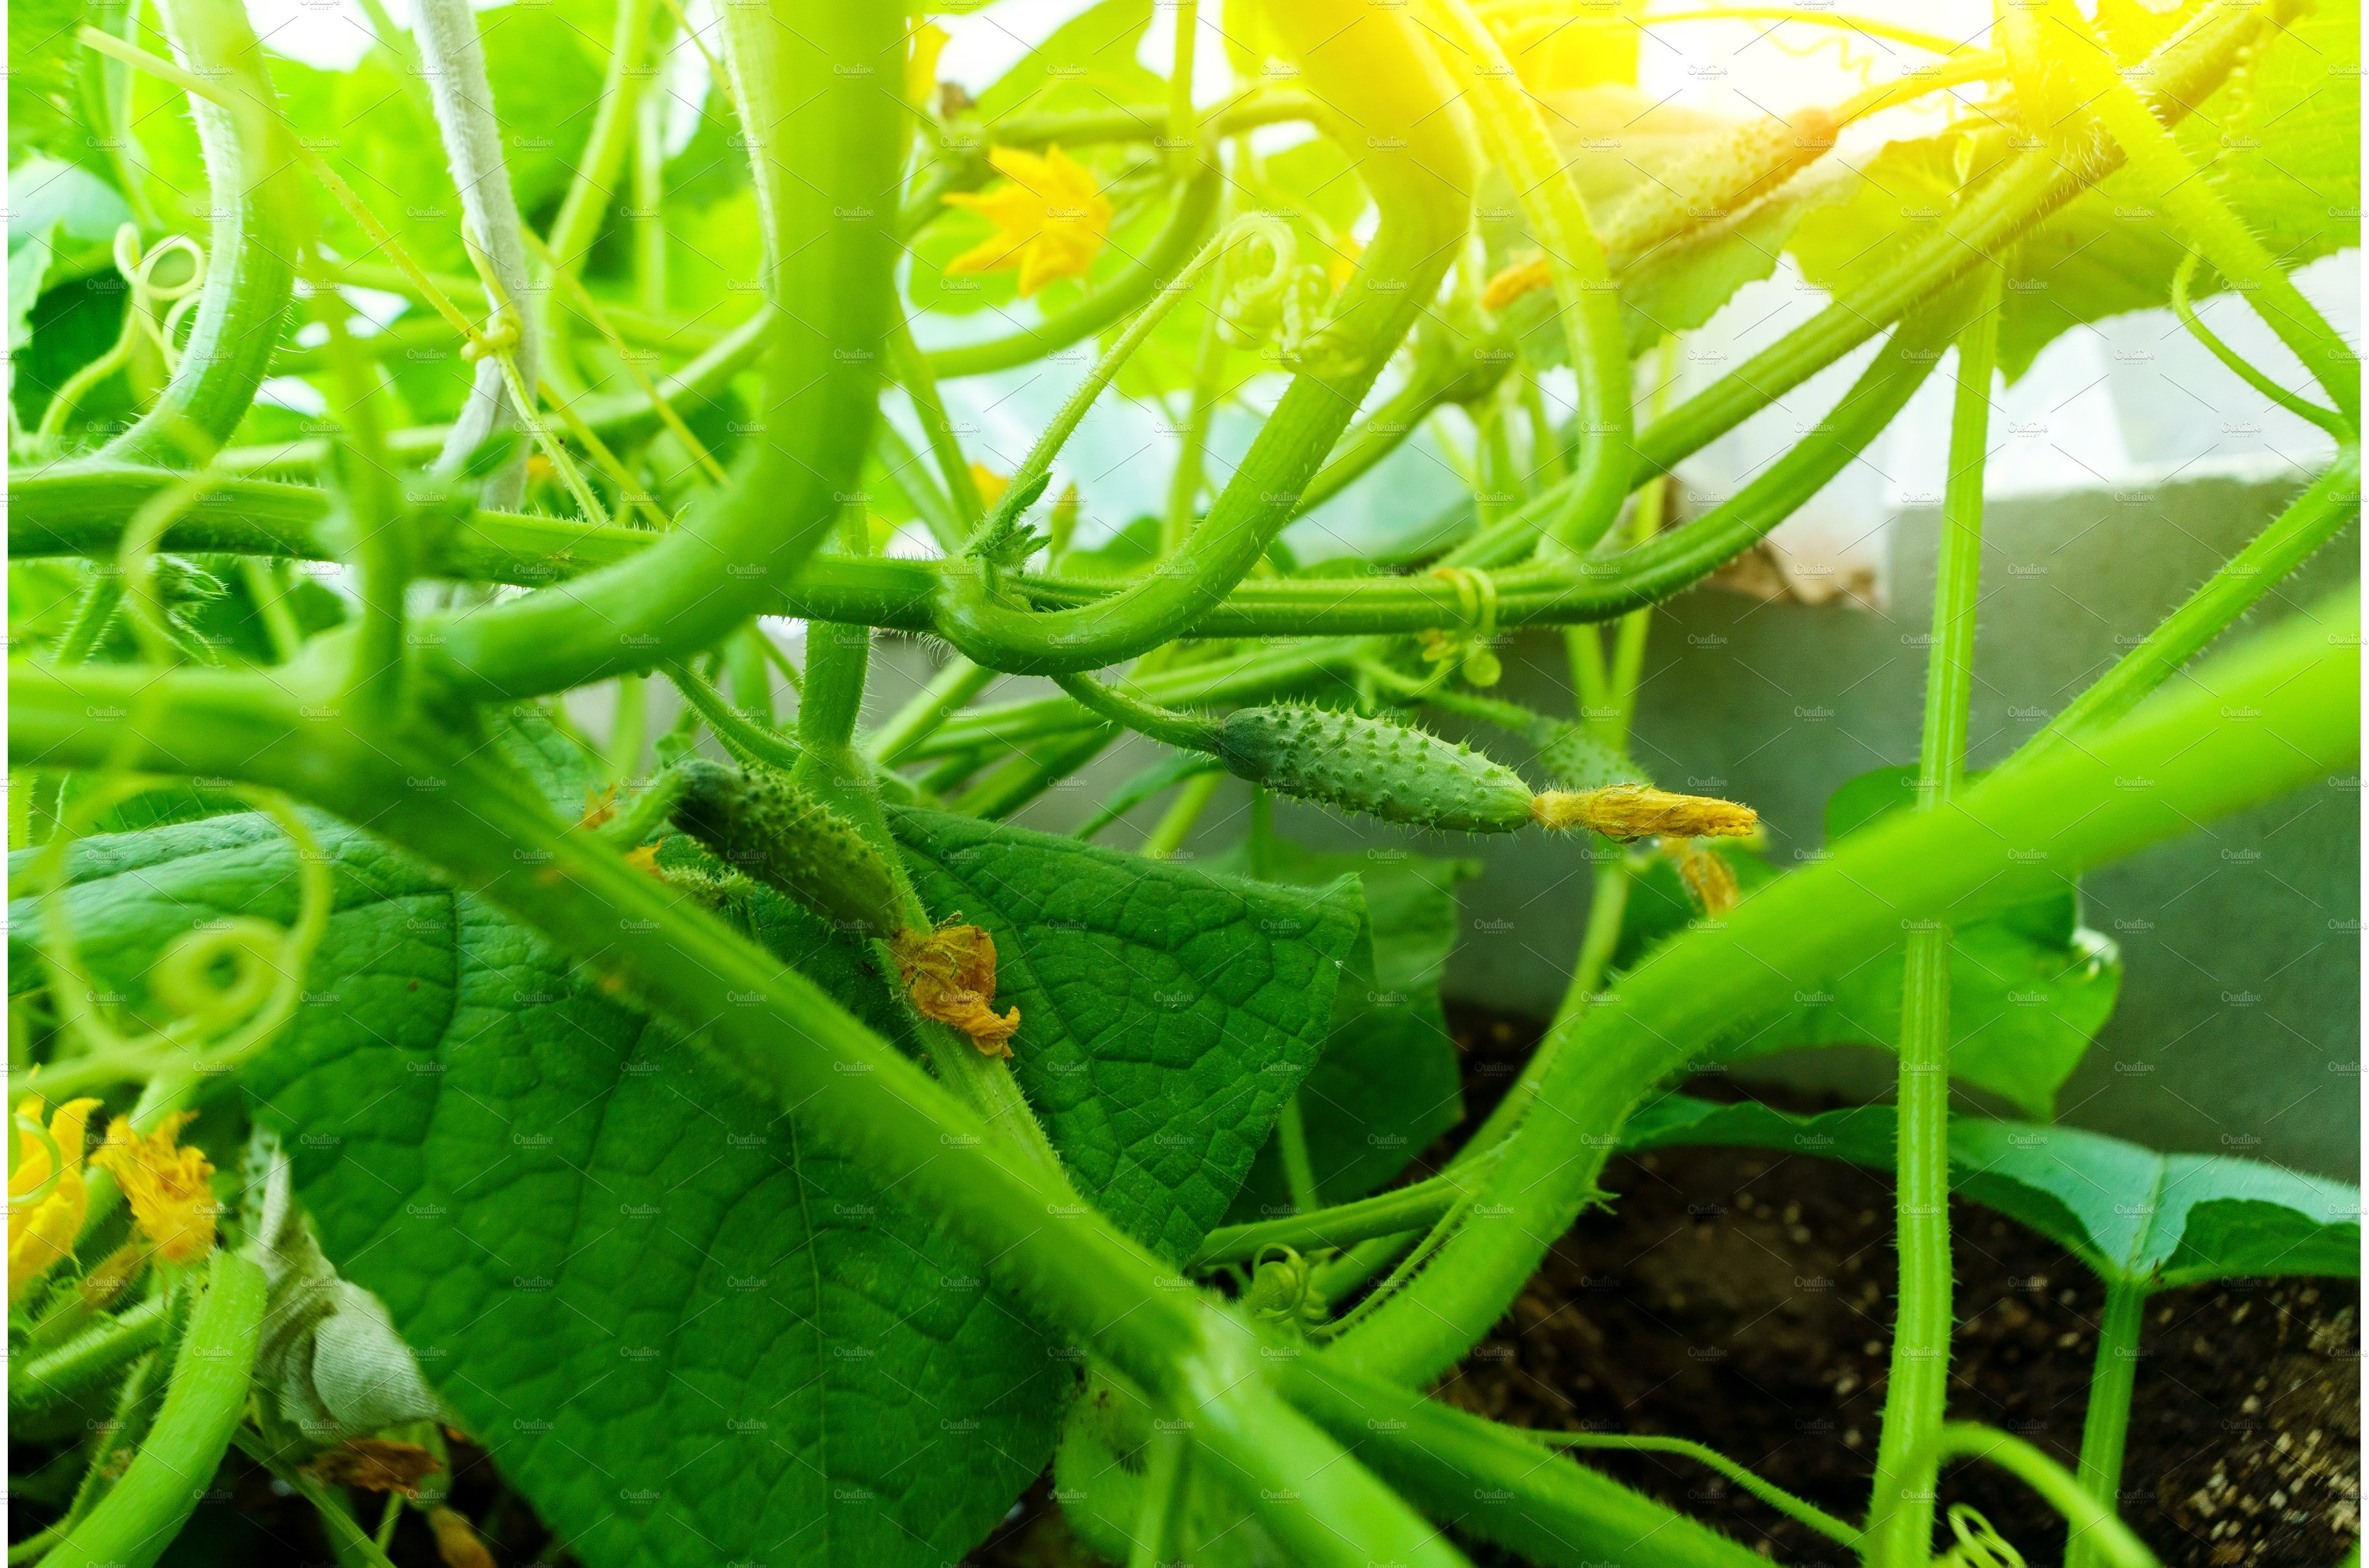 Fresh cucumbers in a hand cover image.